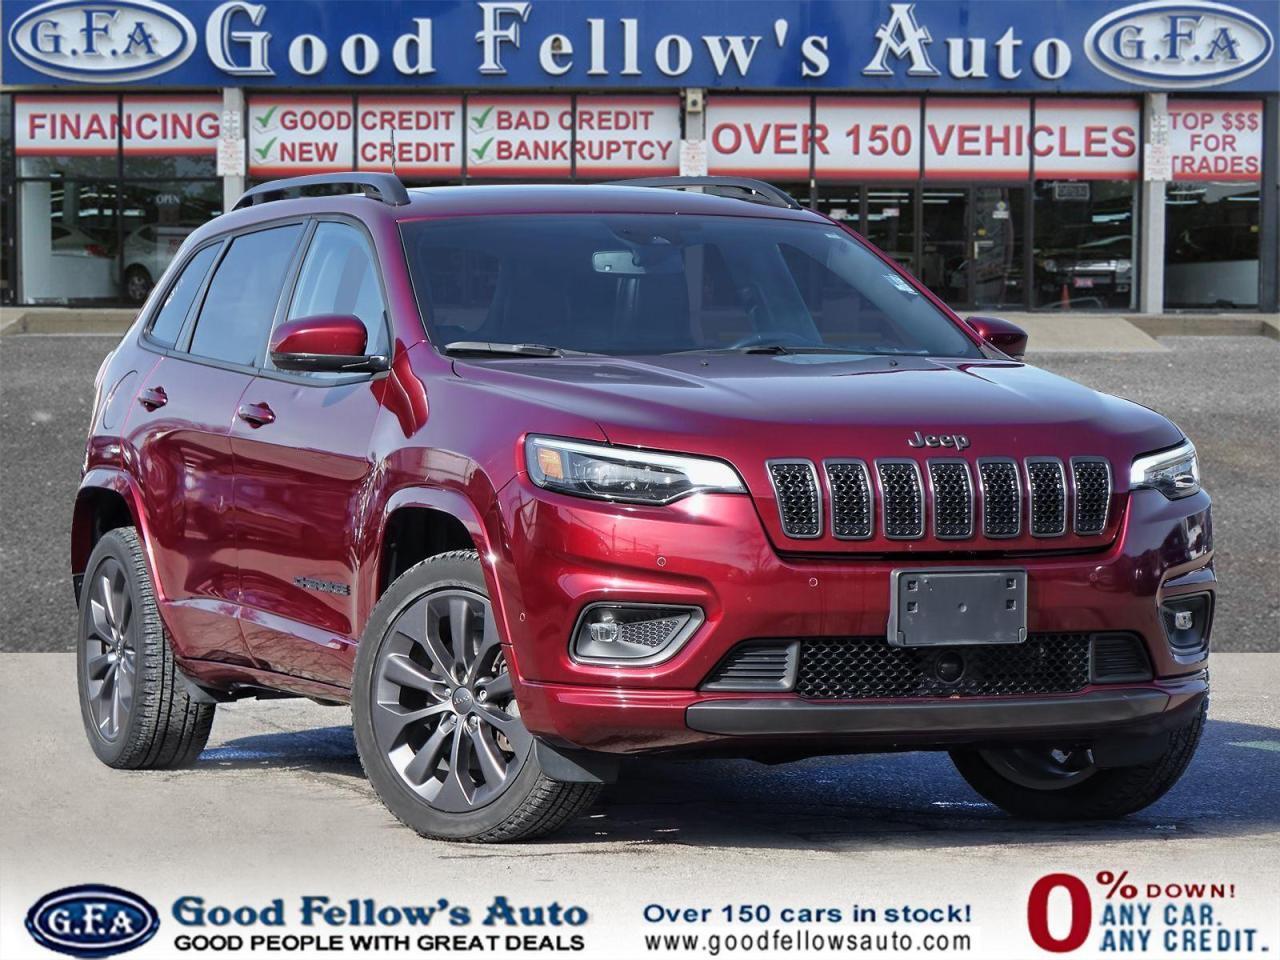 2019 Jeep Cherokee LIMITED MODEL, LEATHER SEATS, SUNROOF, NAVIGATION,